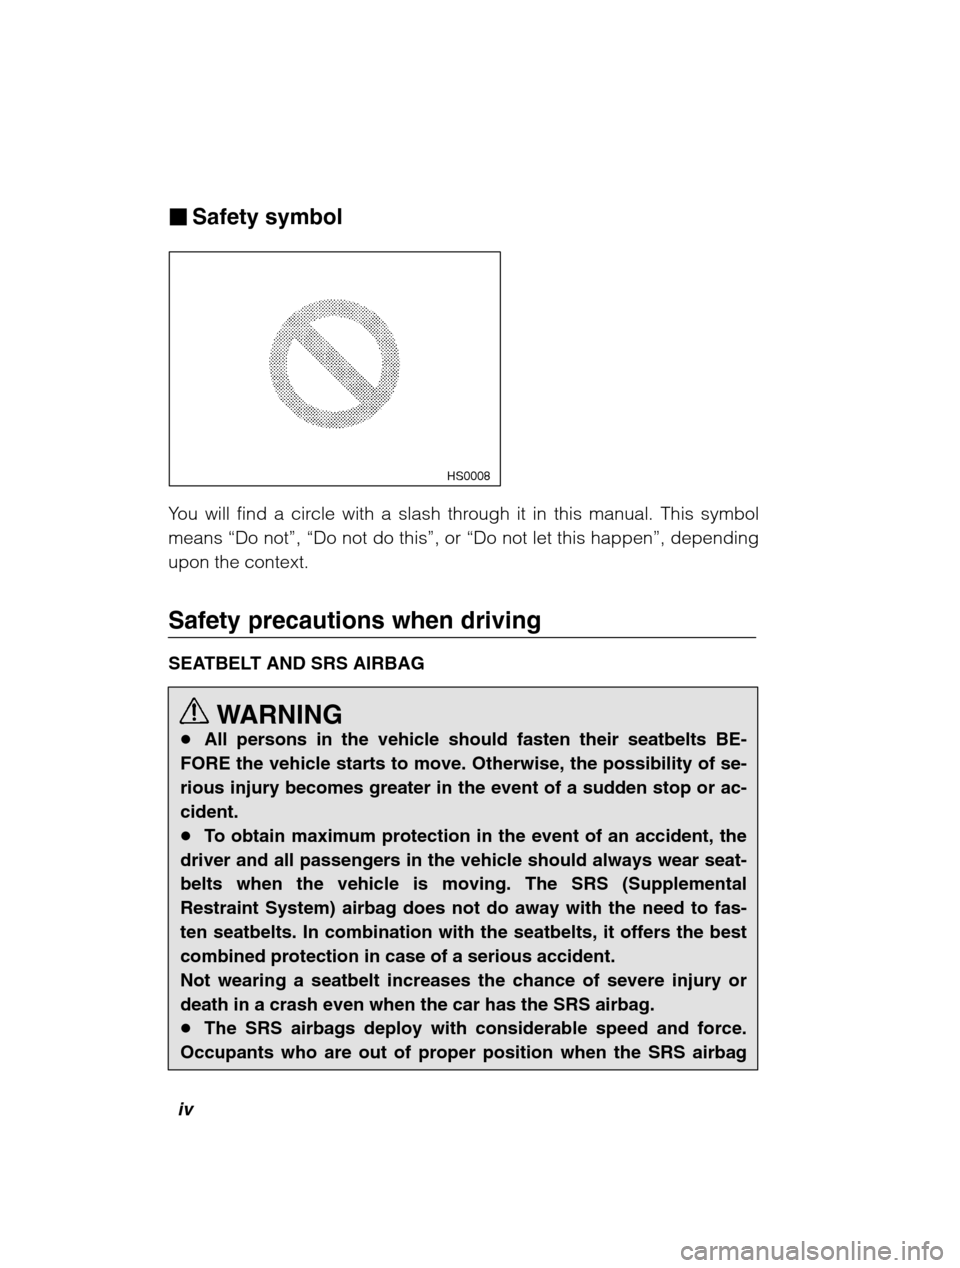 SUBARU LEGACY 2002 3.G Owners Manual iv
�Safety symbol
 HS0008
You will find a circle with a slash through it in this manual. This symbol means  “Do not ”, “Do not do this ”, or  “Do not let this happen ”, depending
upon the 